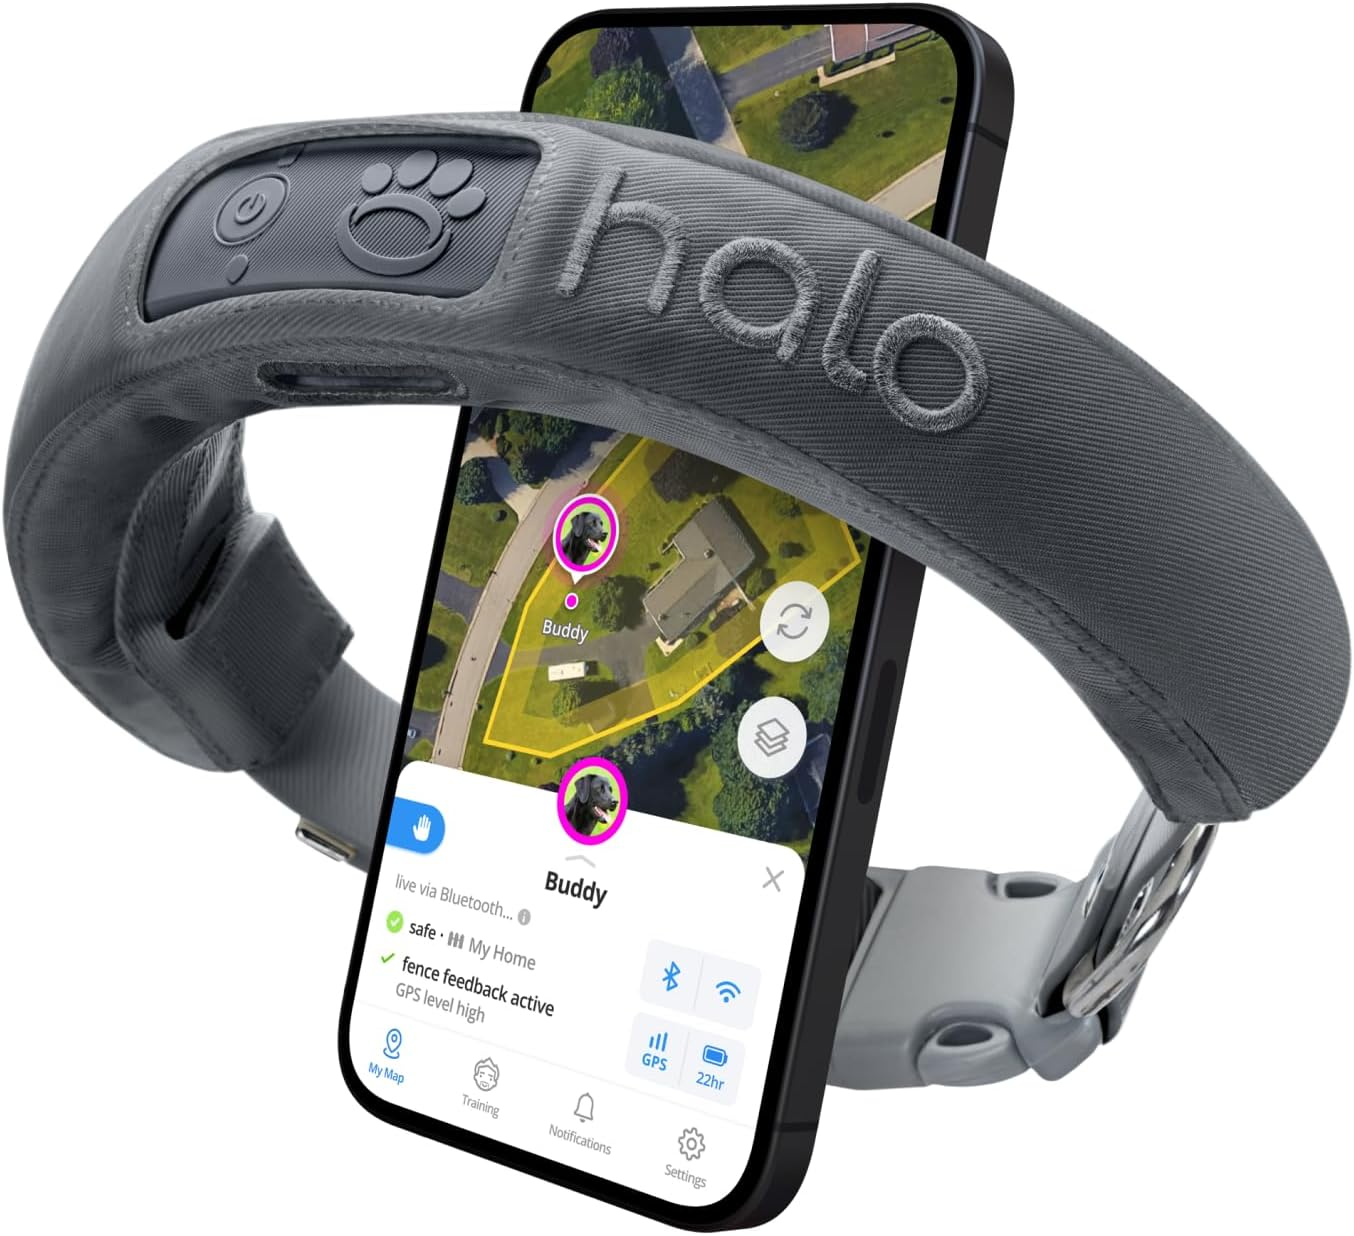 Dog Collars & Tags With Built-In Tracking Devices Better Than AirTag